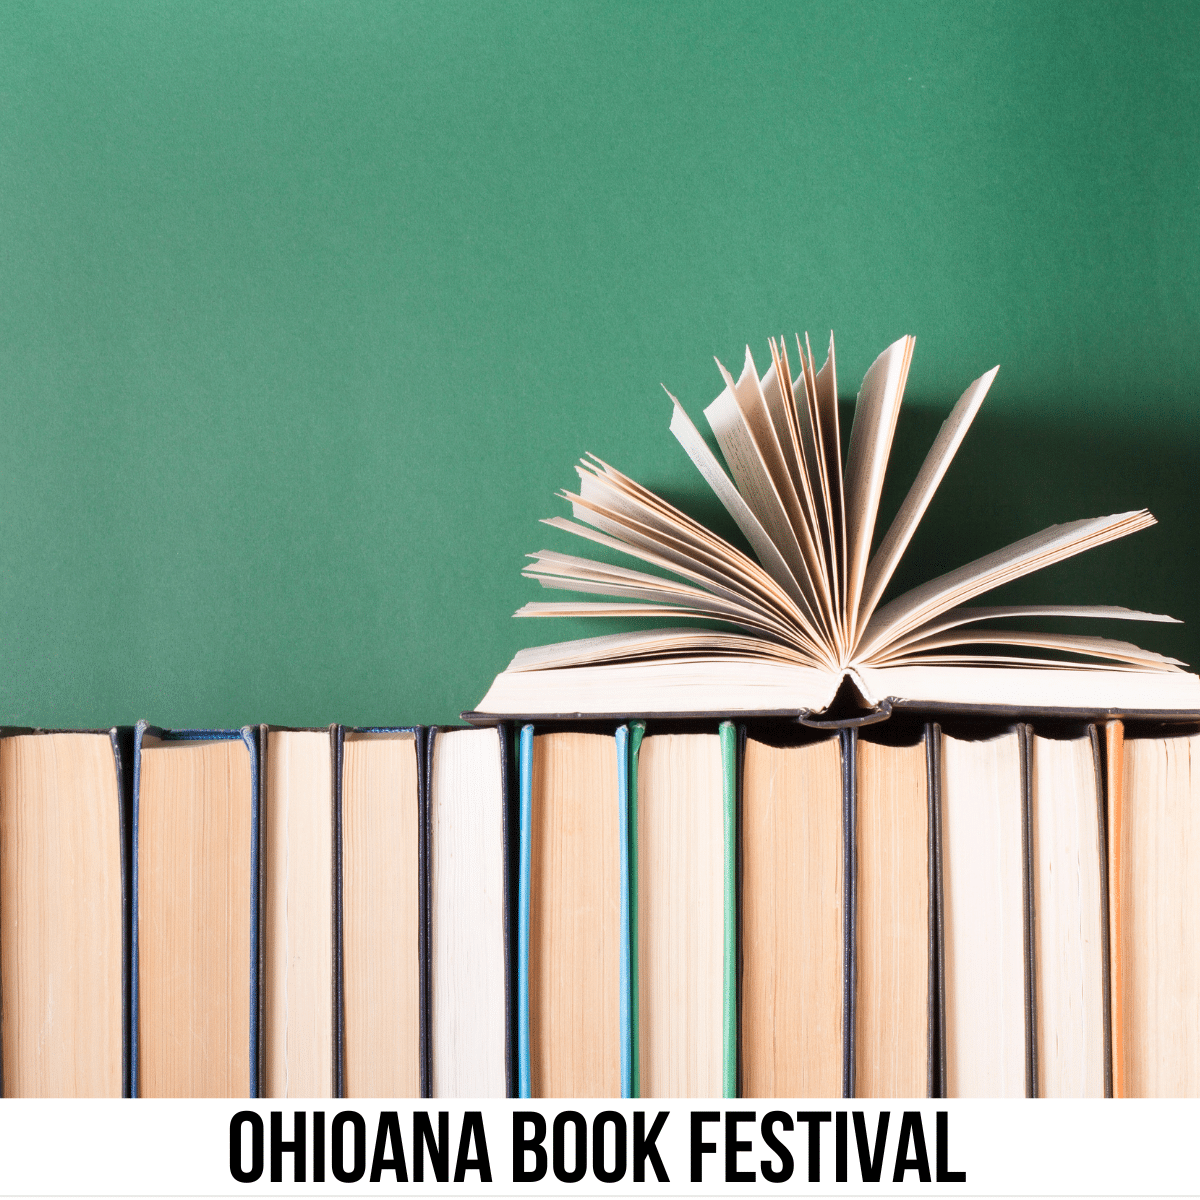 A square image of a photo of a row of books with a book sitting on top, open, with the pages fanned out. A white strip across the bottom has text Ohioana Book Festival